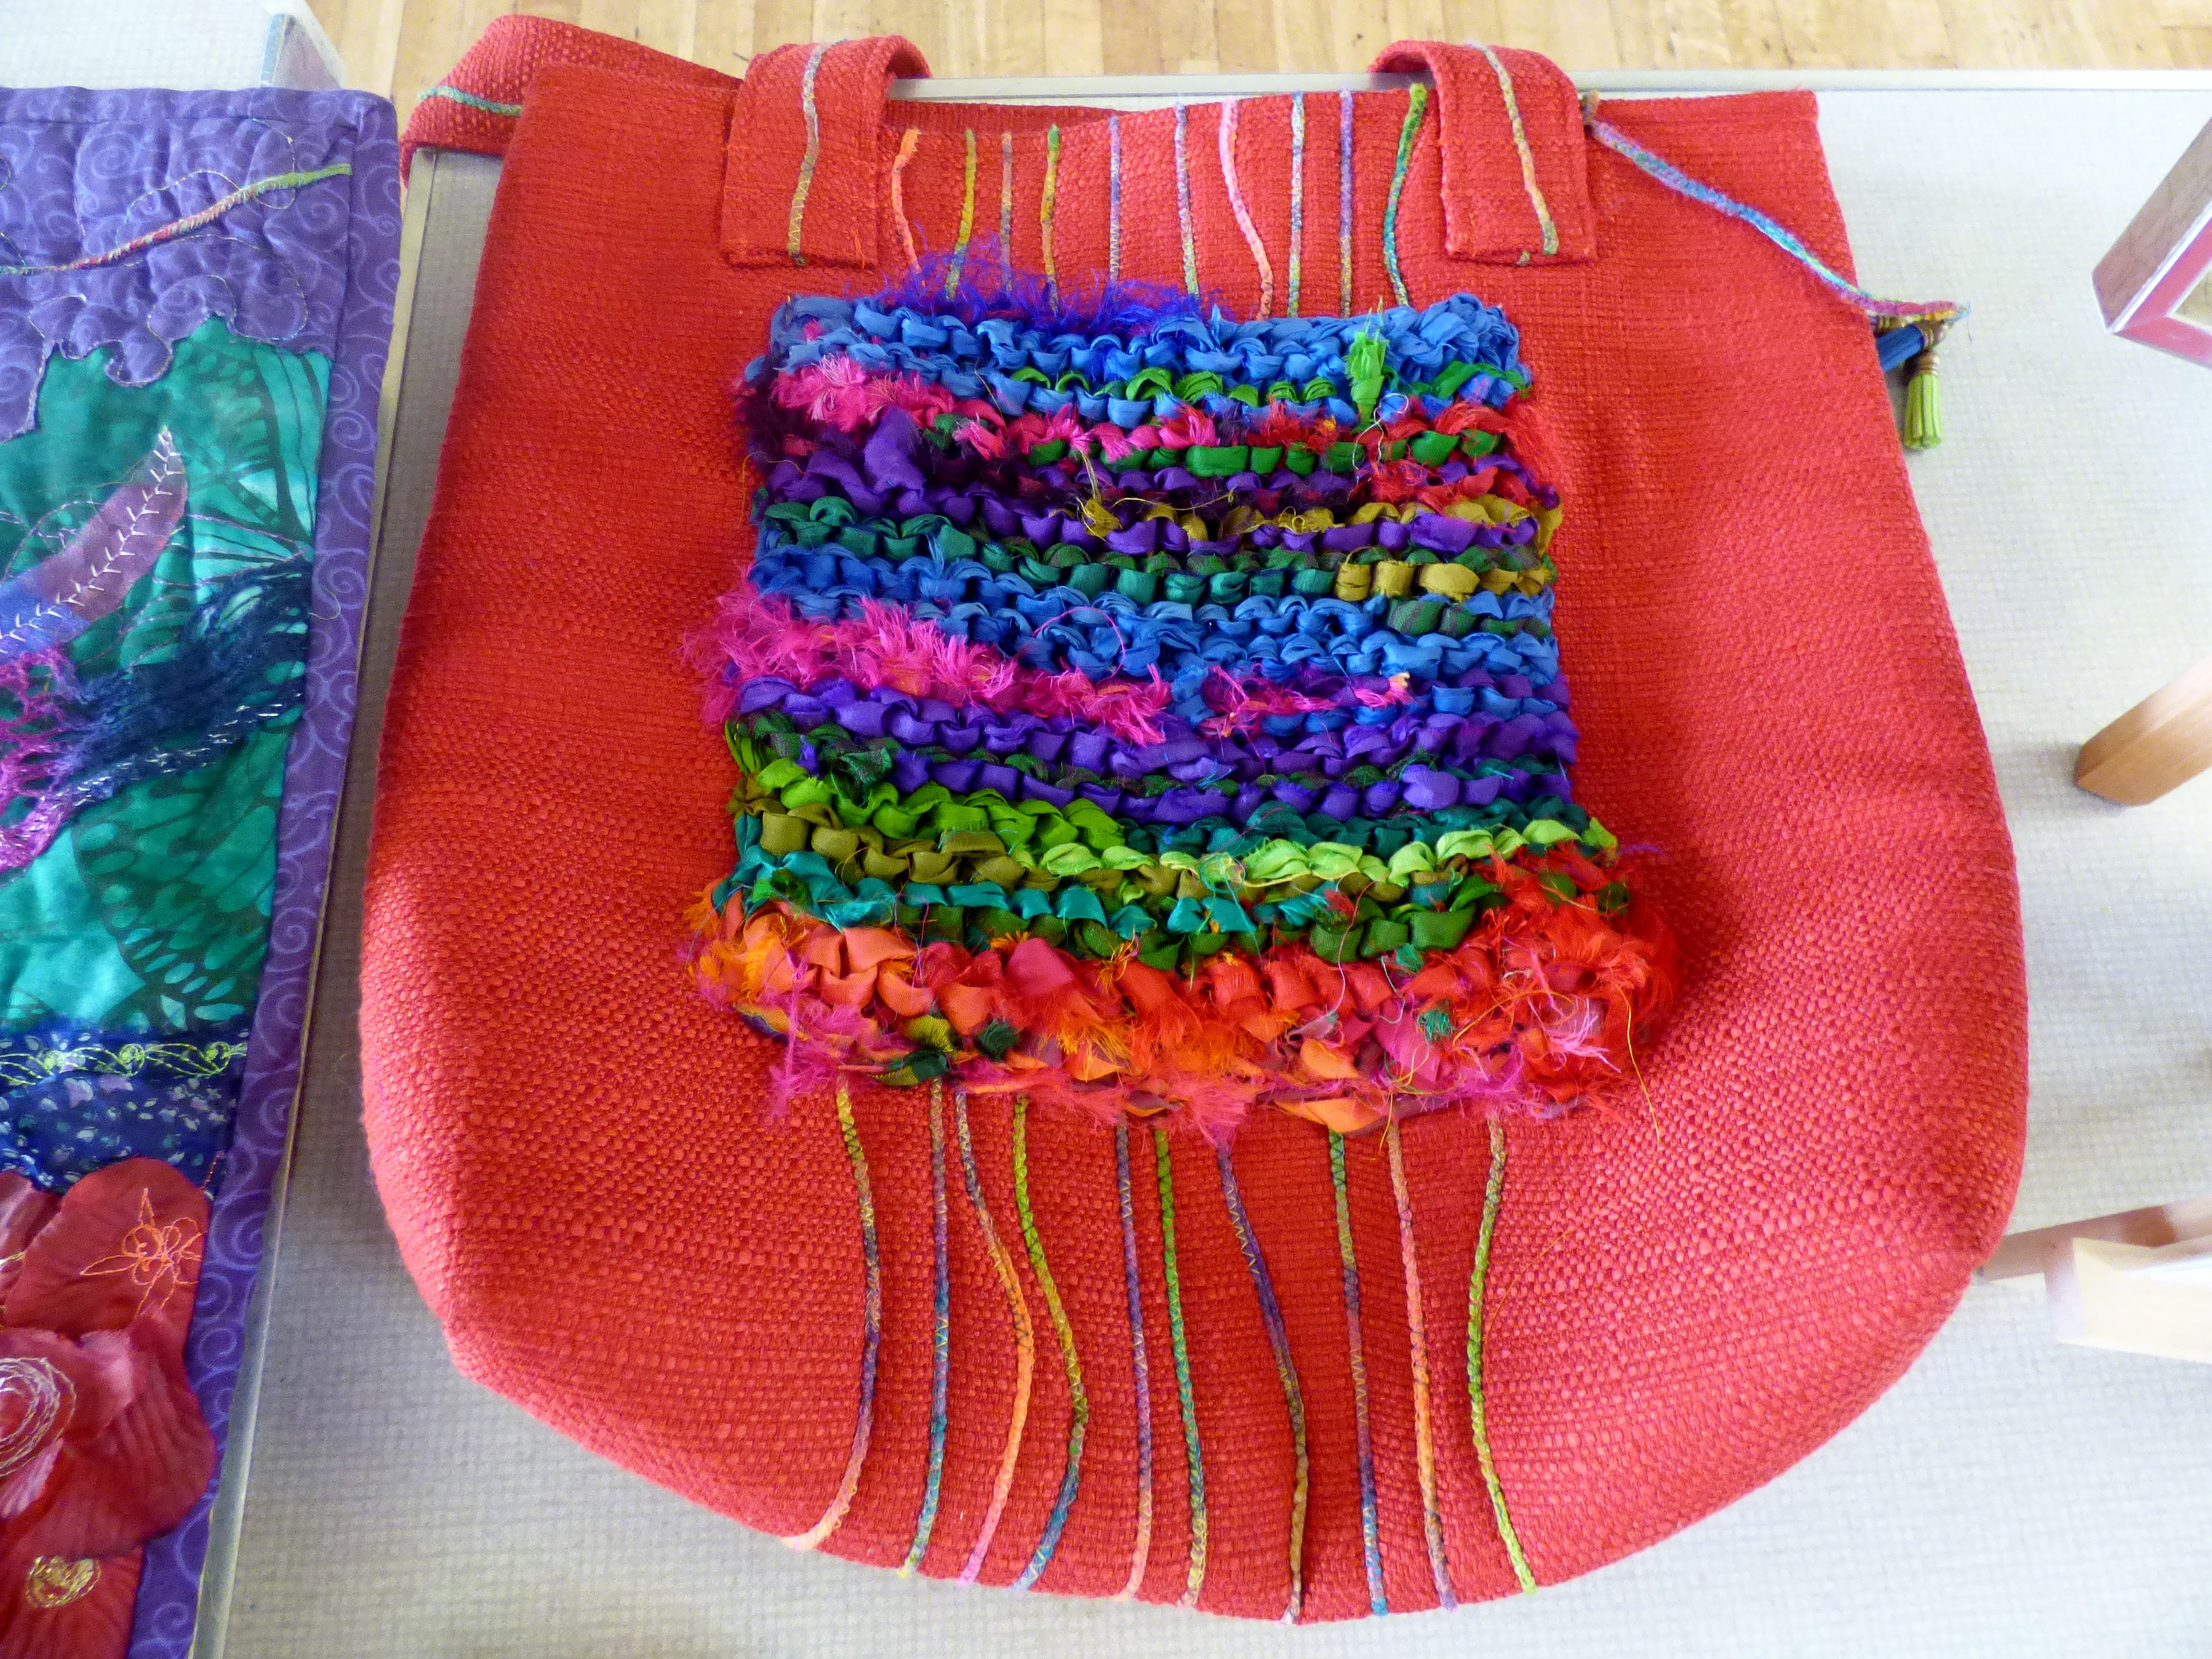 sample by Diane Moore at "Creating with Sari Silk" workshop with Diane Moore, Feb 2023